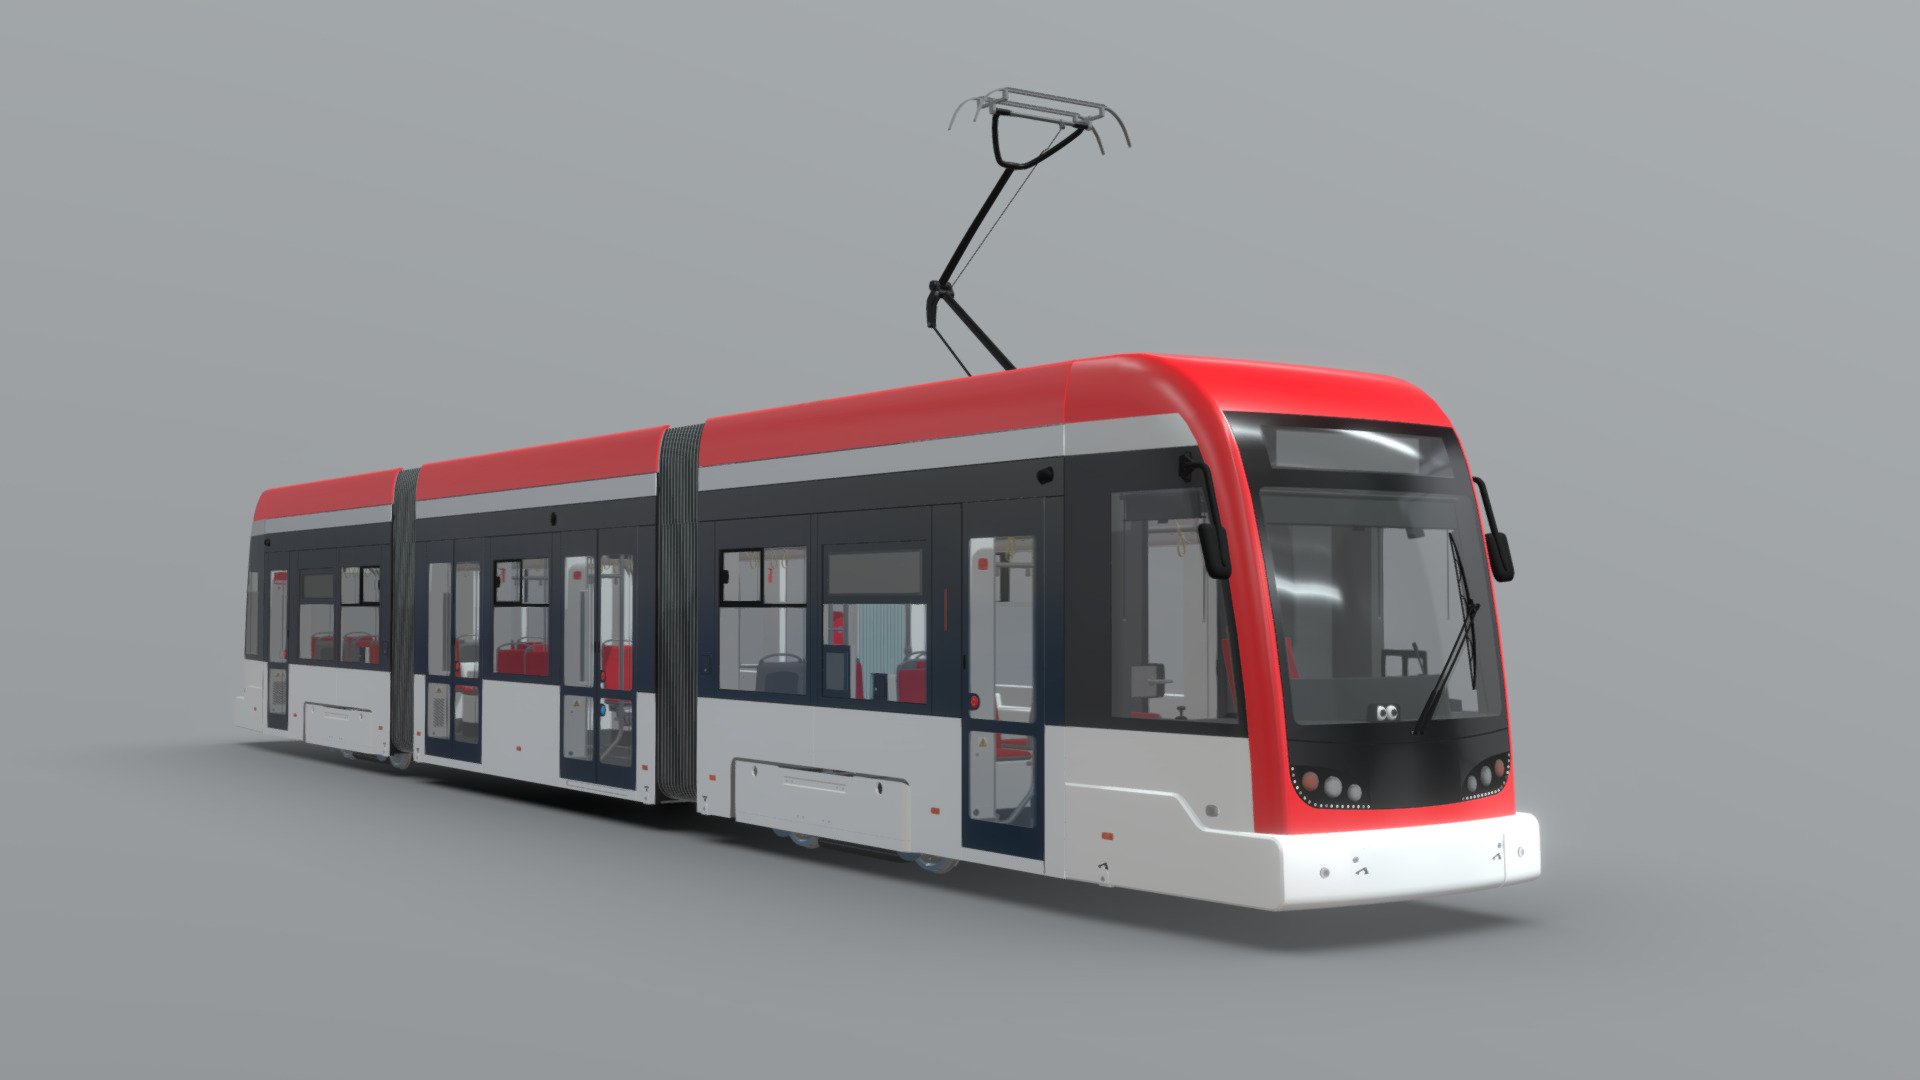 Original design of a modern tram.
Primary technical data:
Number of units: 3
Total Length: 20,843mm
Width of the vehicle body: 2,417mm
Height (without a pantograph): 3,528mm
Number of seats: 34 + 2 foldable
Standing spaces: 95
Entry height: 350mm
100% Low floor - Modern Tram II [Fully detailed] (3 unit) - Buy Royalty Free 3D model by KolorowyAnanas 3d model